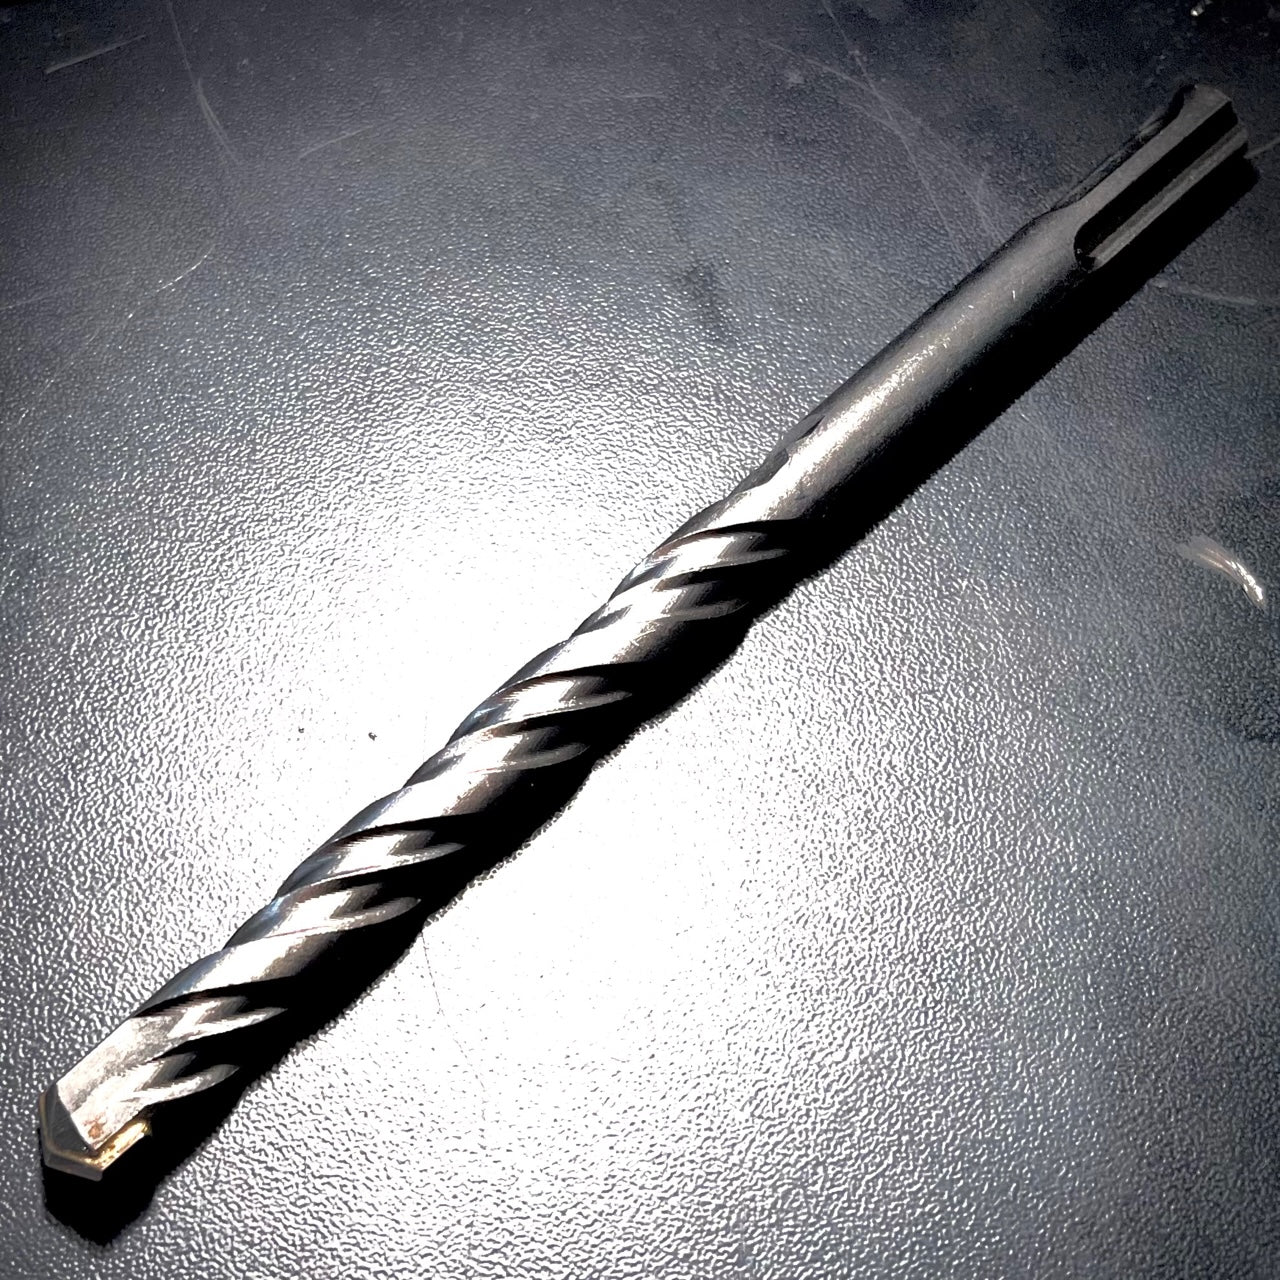 14mm, 16mm, 18mm, 20mm, 22mm, 24mm SDS + Masonry Drill Bits, Short and Long Tools and Machinery 14mm, 16mm, 18mm, 20mm, 22mm, 24mm SDS + Masonry Drill Bits, Short and Long SDS + Masonry Drill Bit